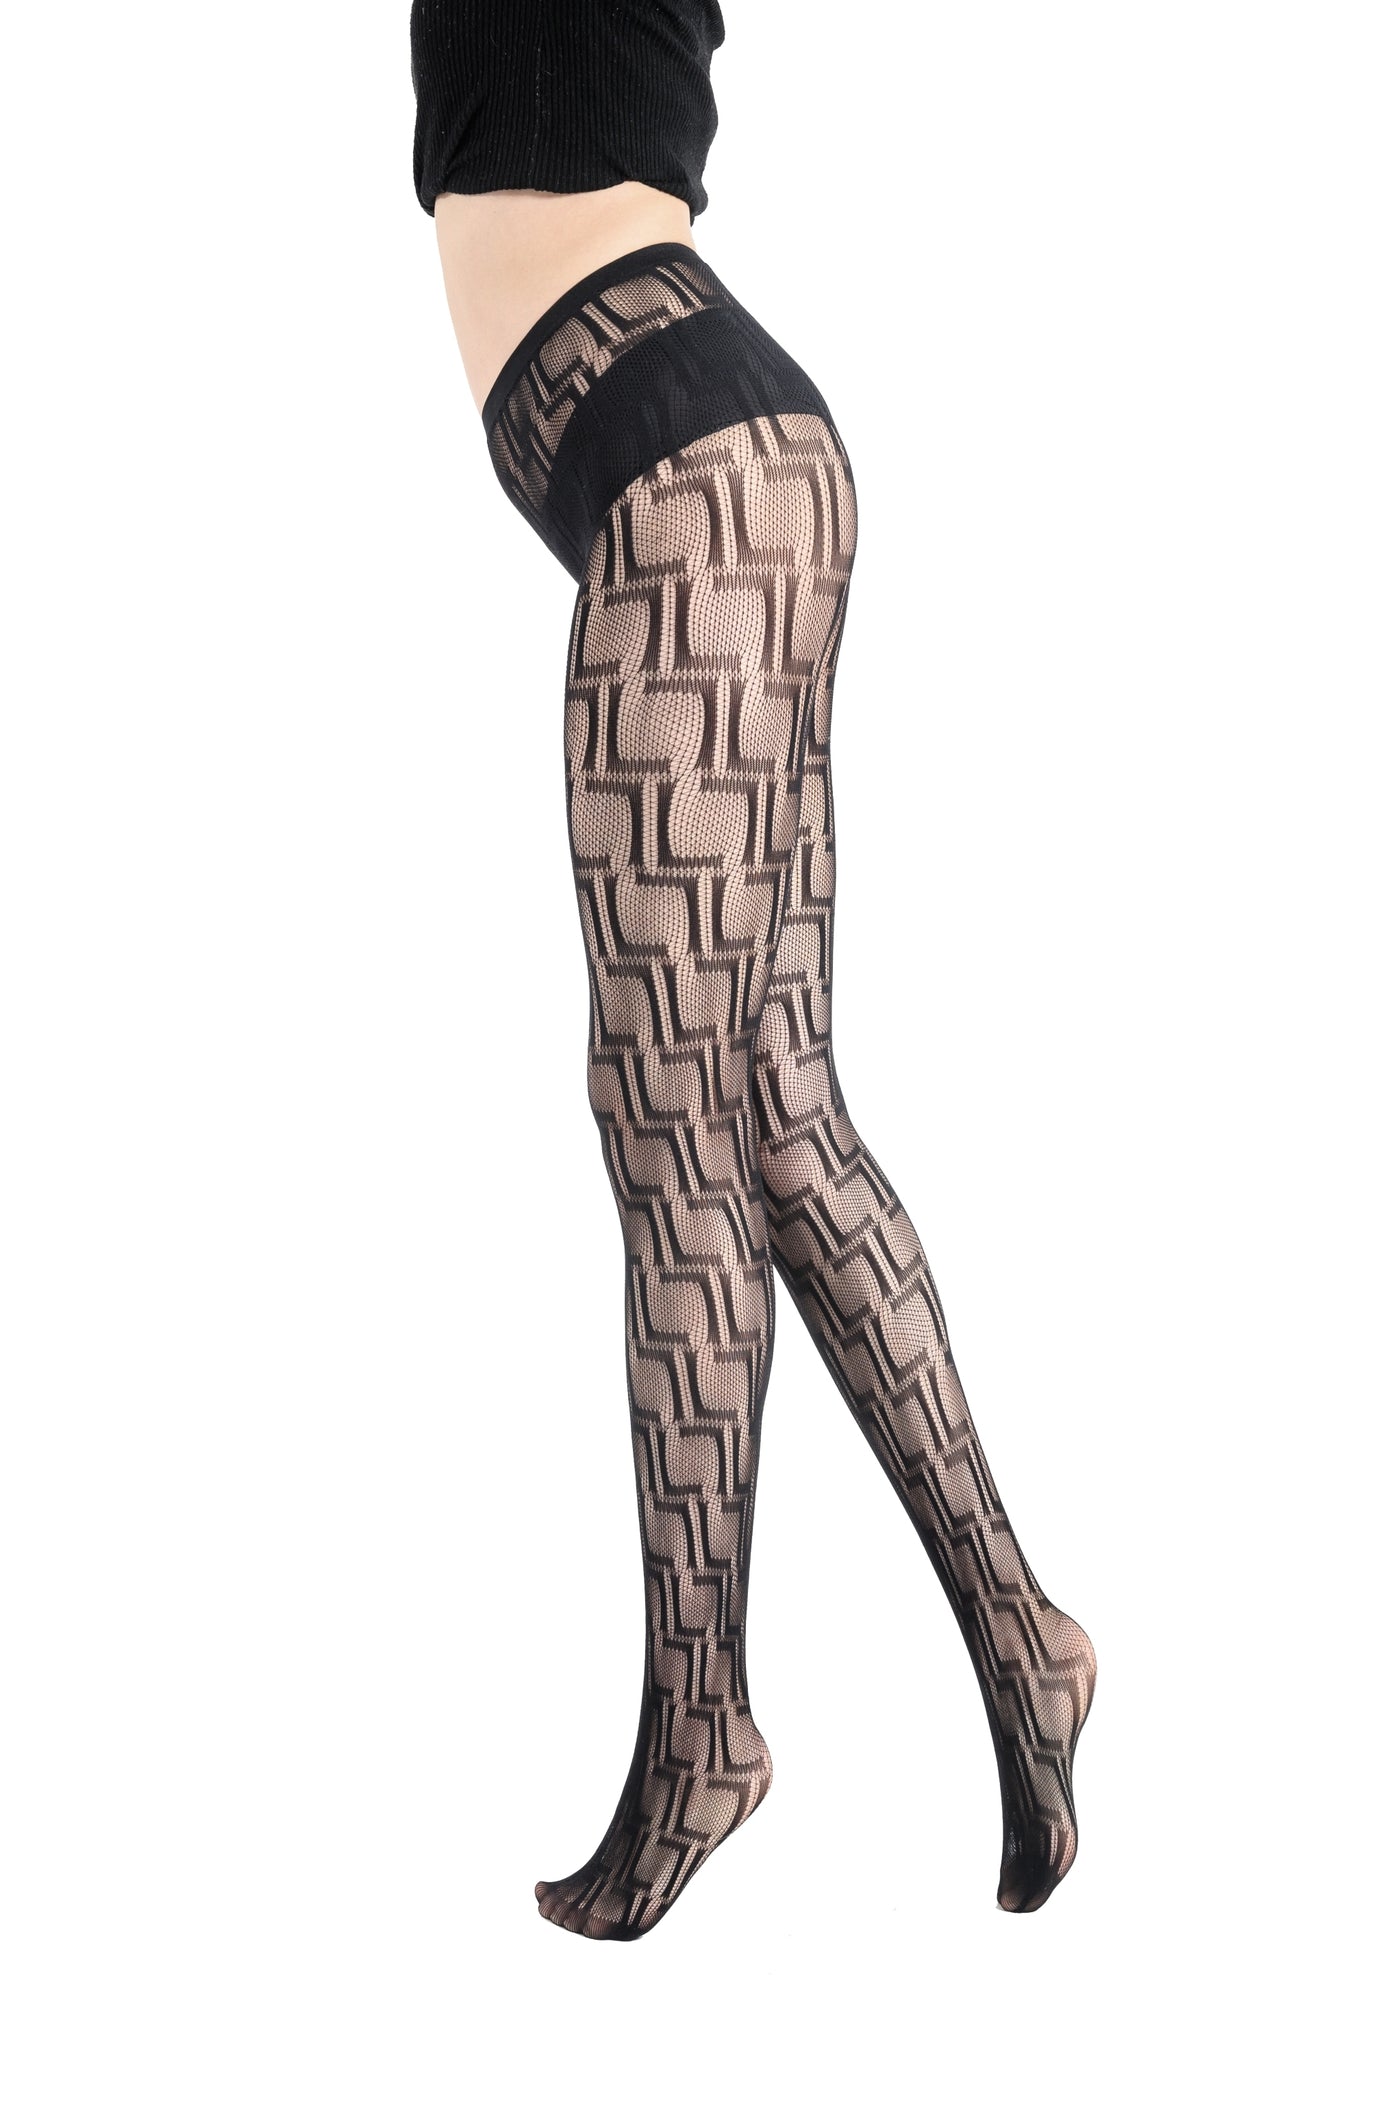 Fishnet Tights 111421 Front